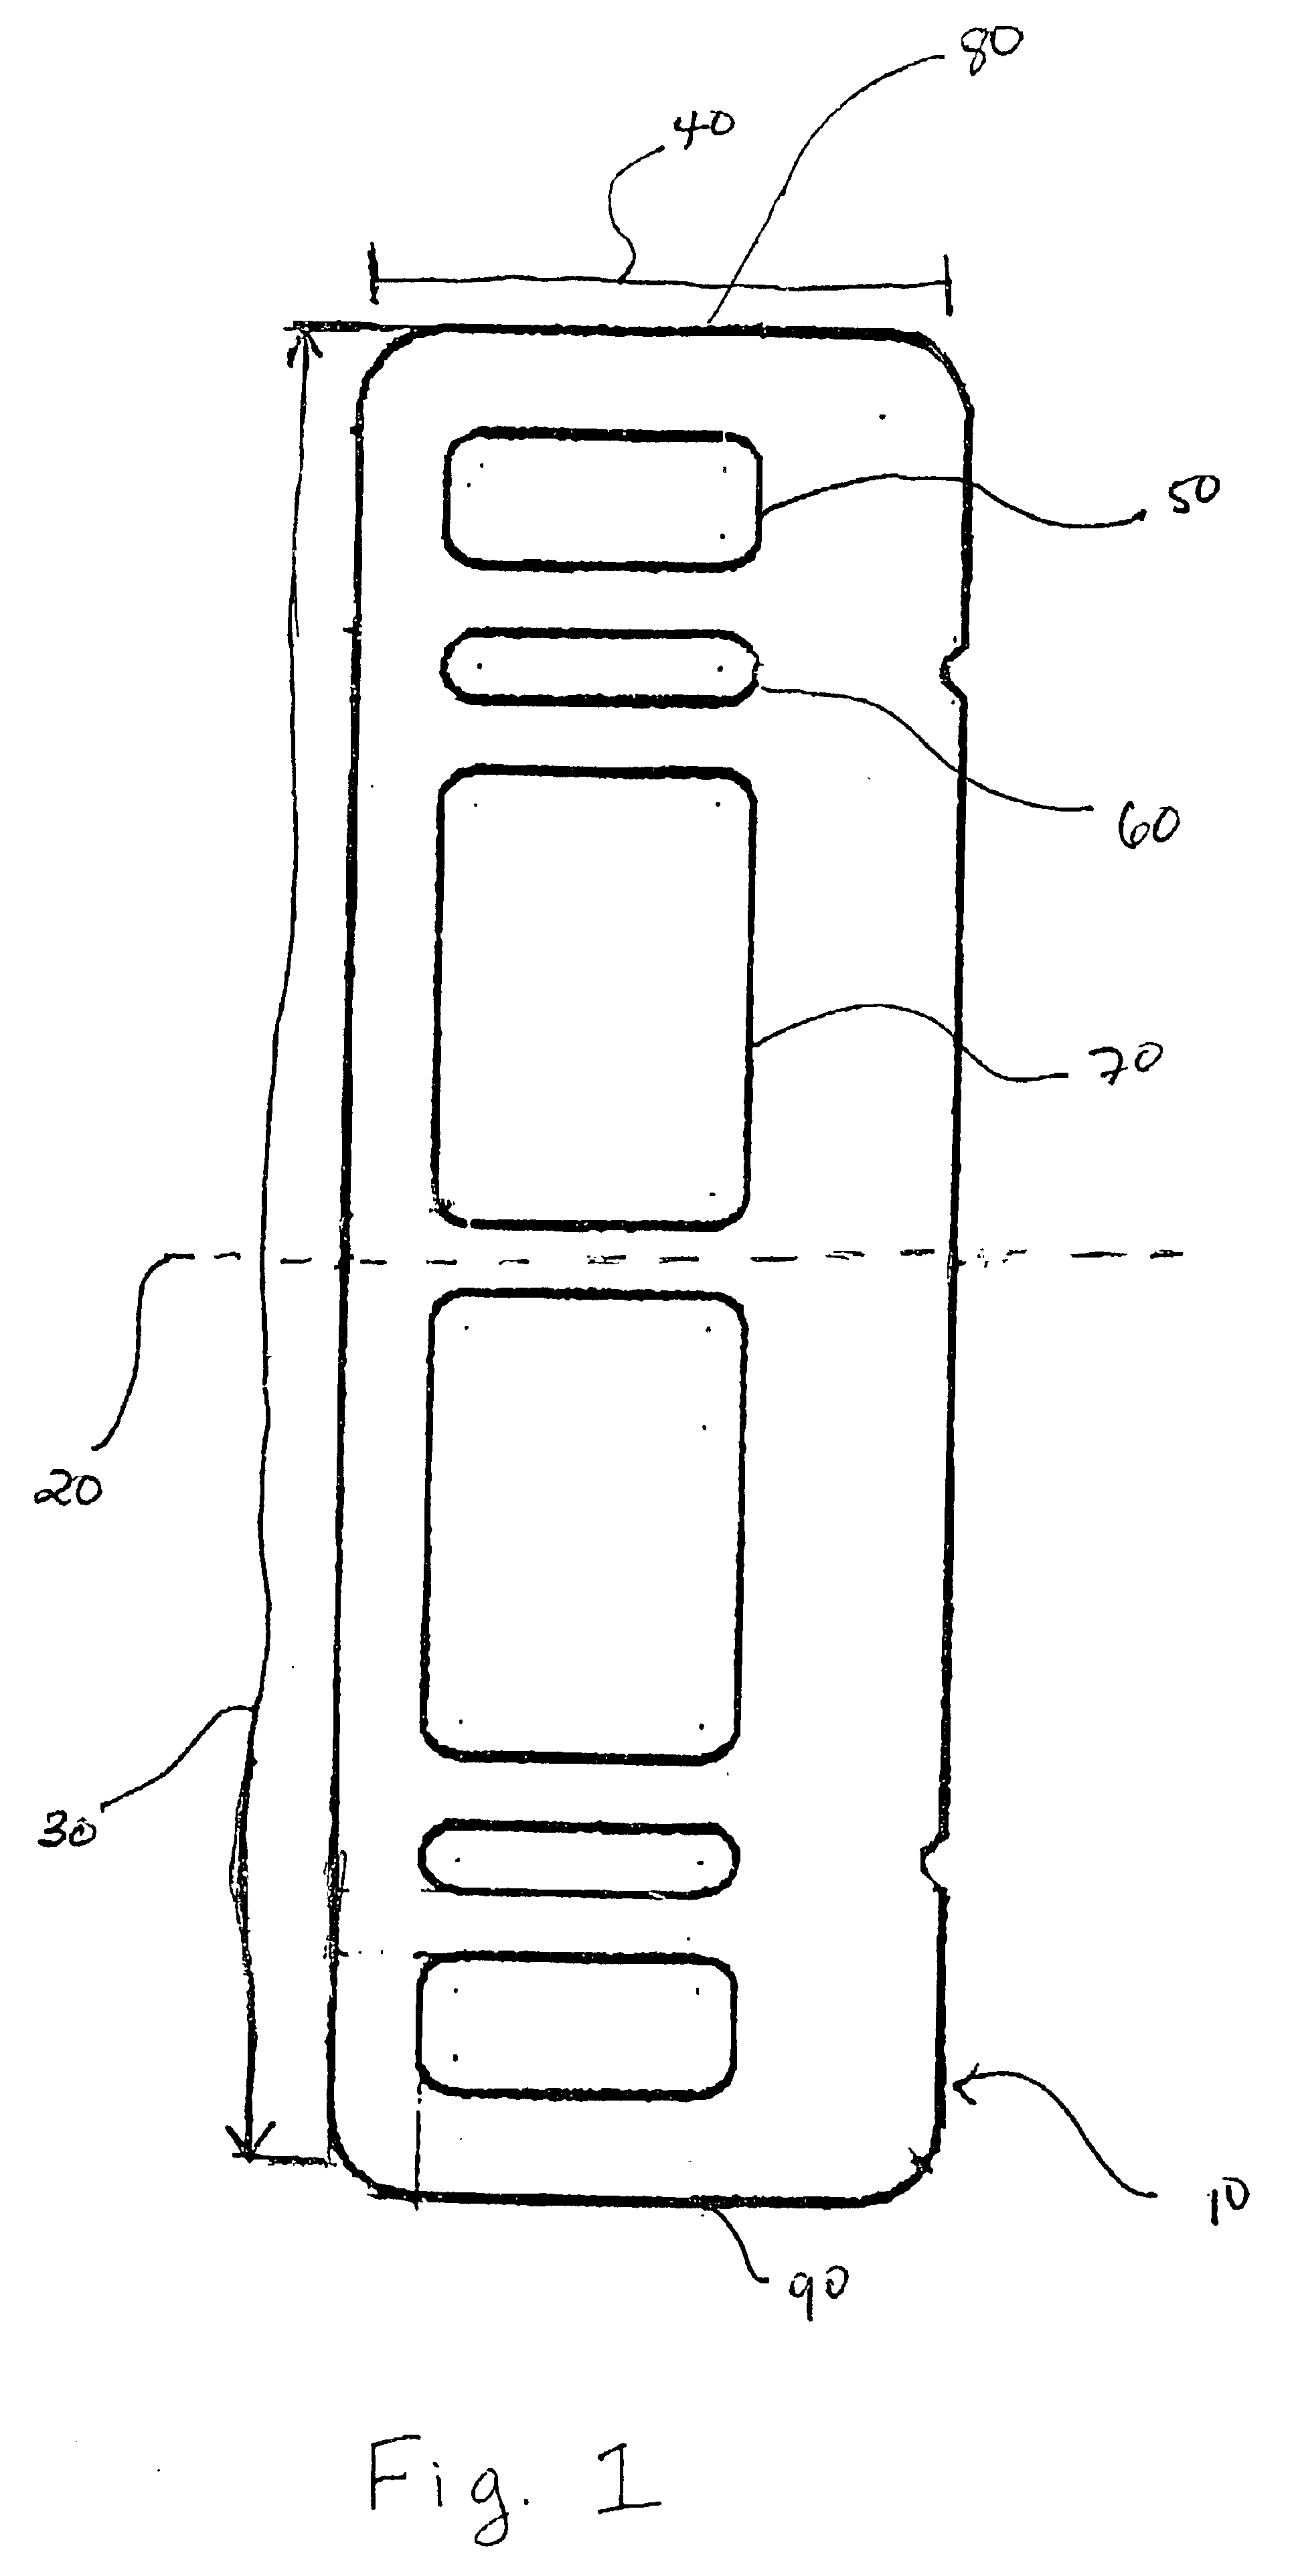 Composite materials, articles of manufacture produced therefrom, and methods for their manufacture